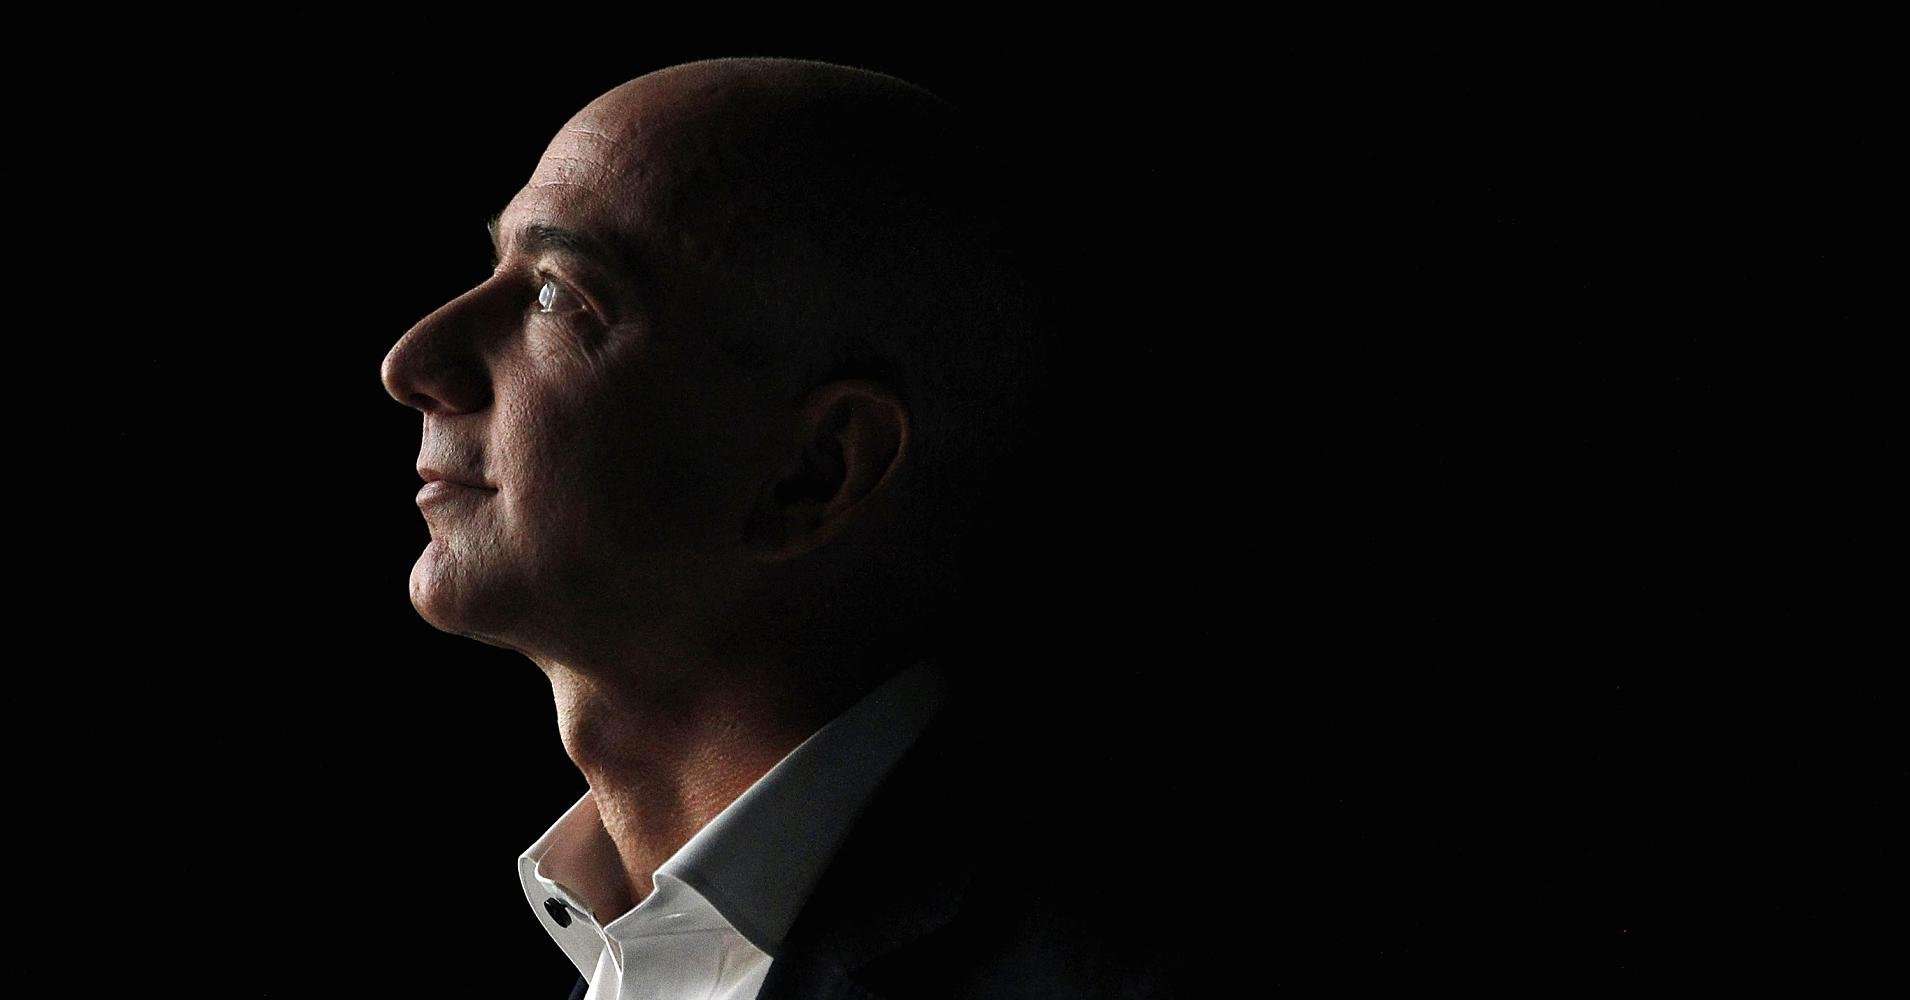 image for Jeff Bezos was briefly the world’s richest person